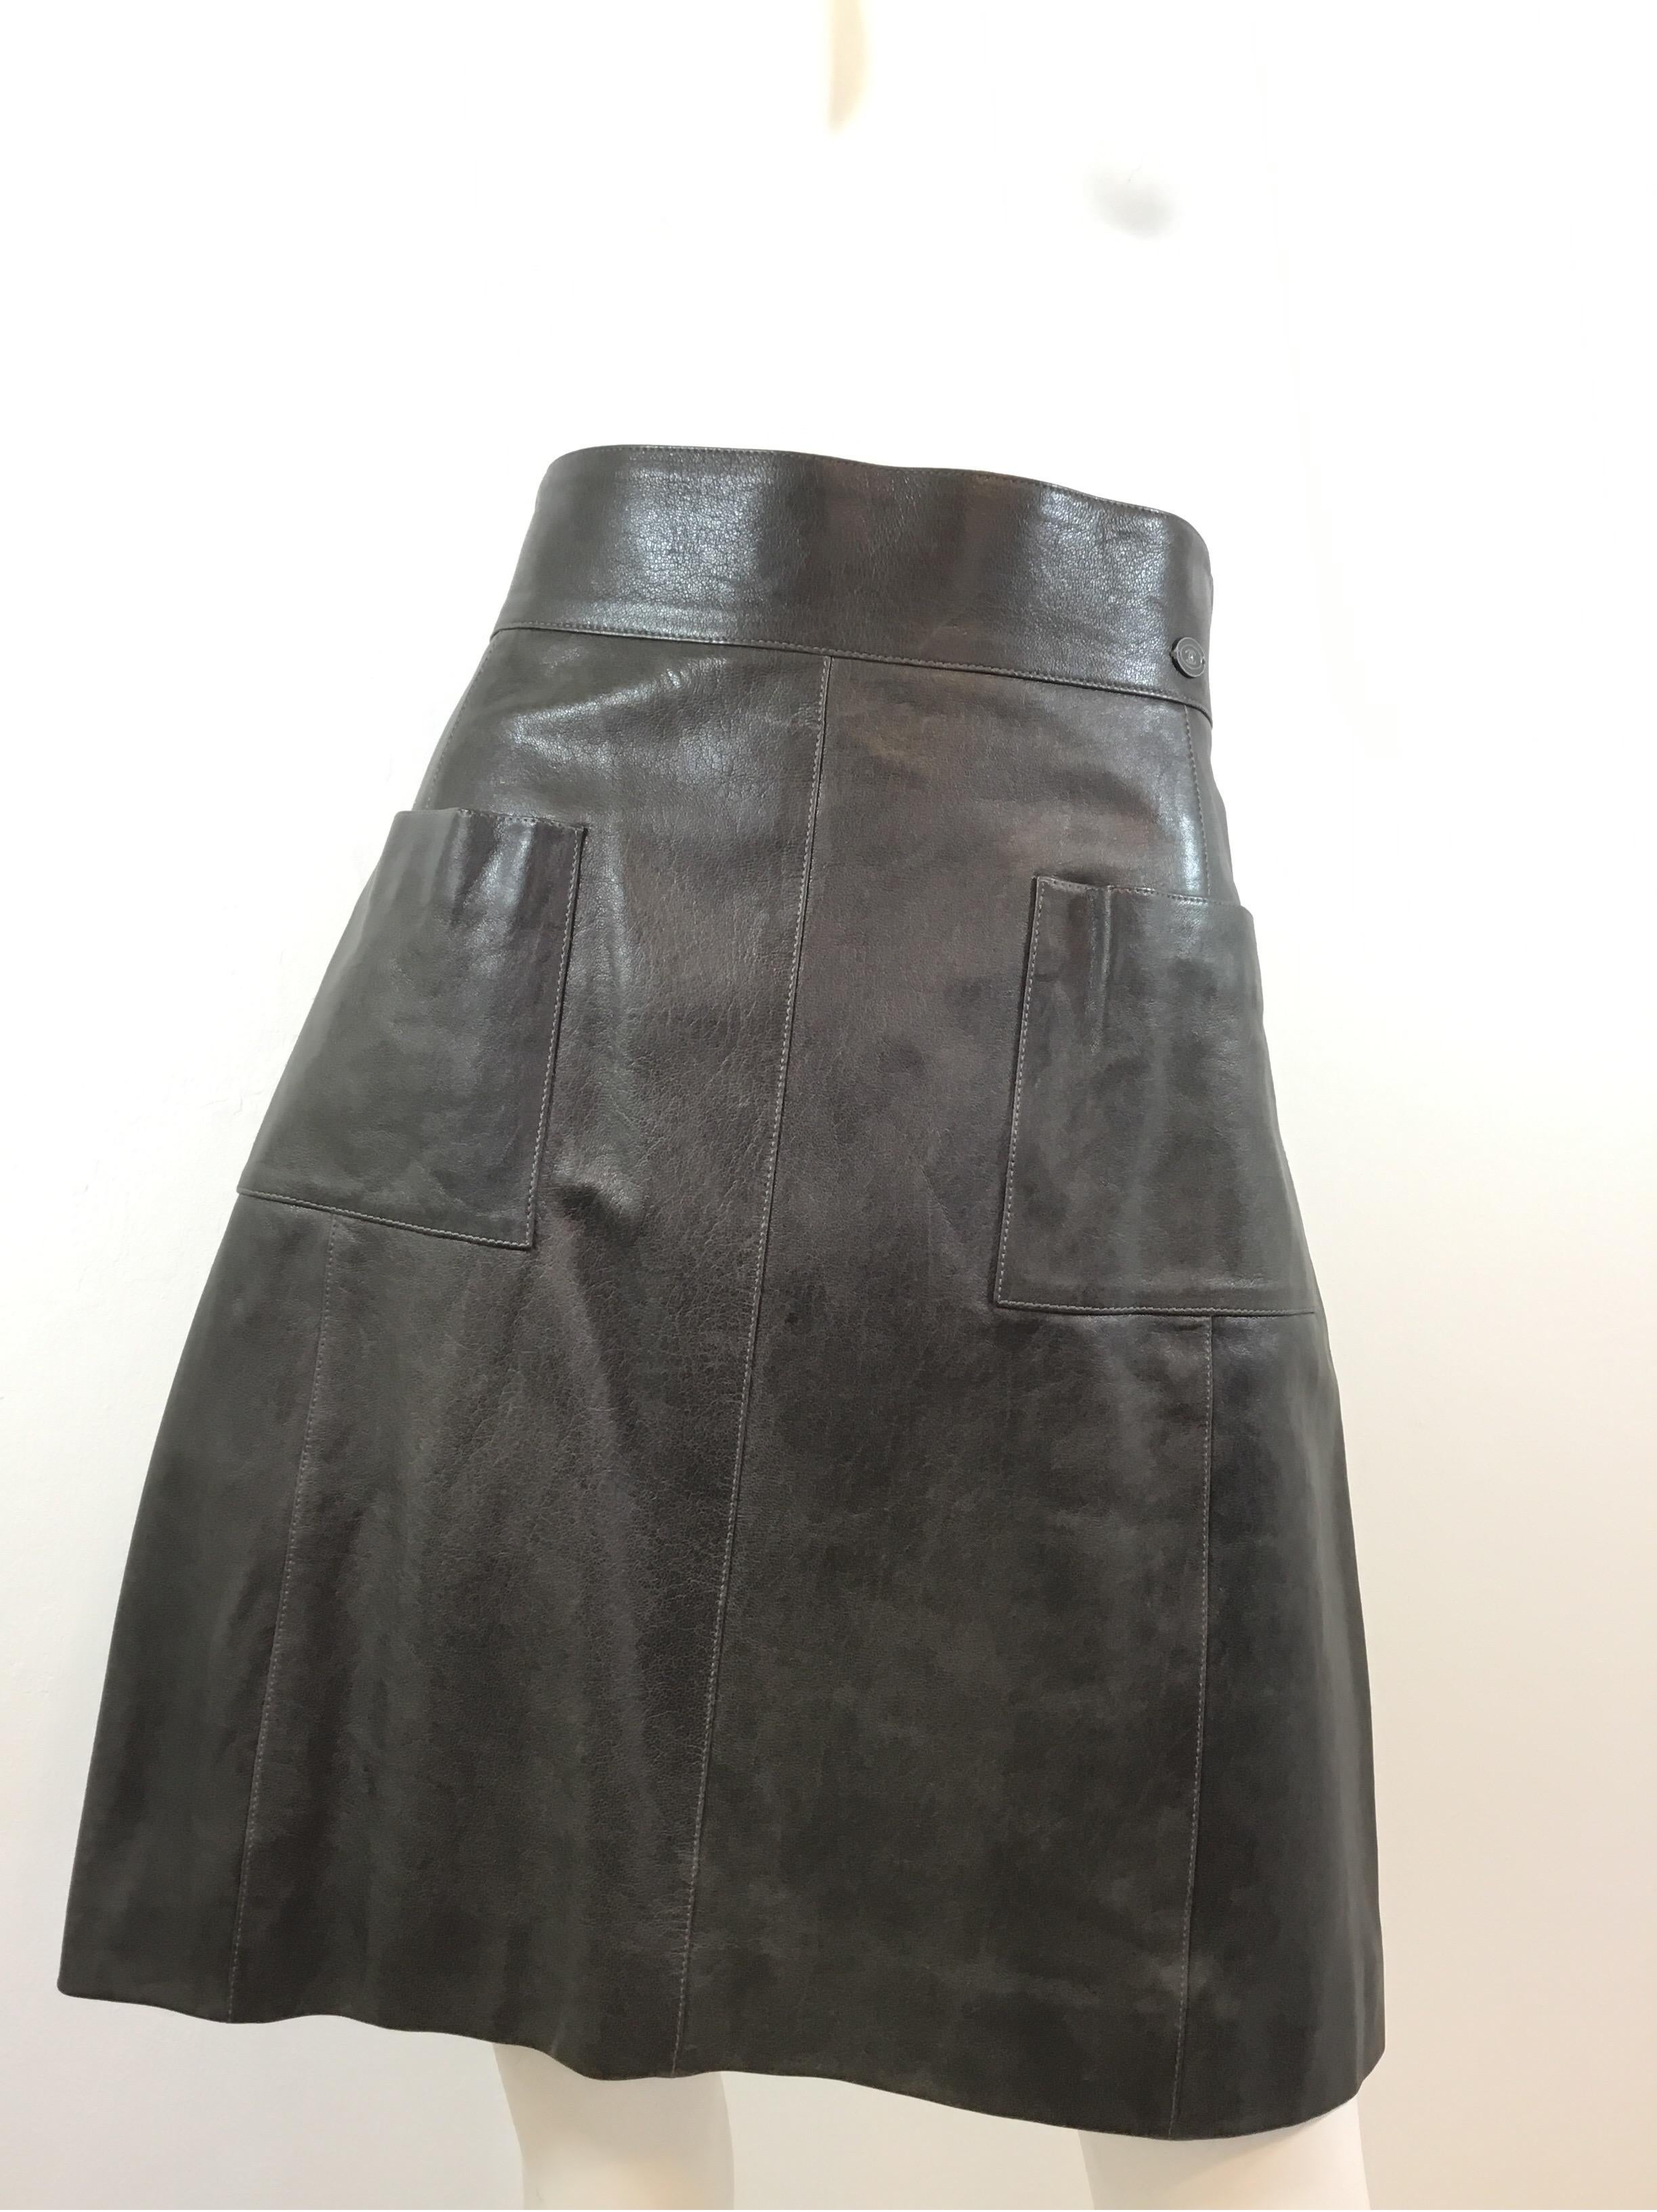 Chanel lambskin leather skirt is featured in an Olive green color with two front slip pockets and a back zipper fastening. Skirt is a size 42, 100% lambskin and lined in 100% silk. Made in France.

Waist 31”, hips 35”, length 20”